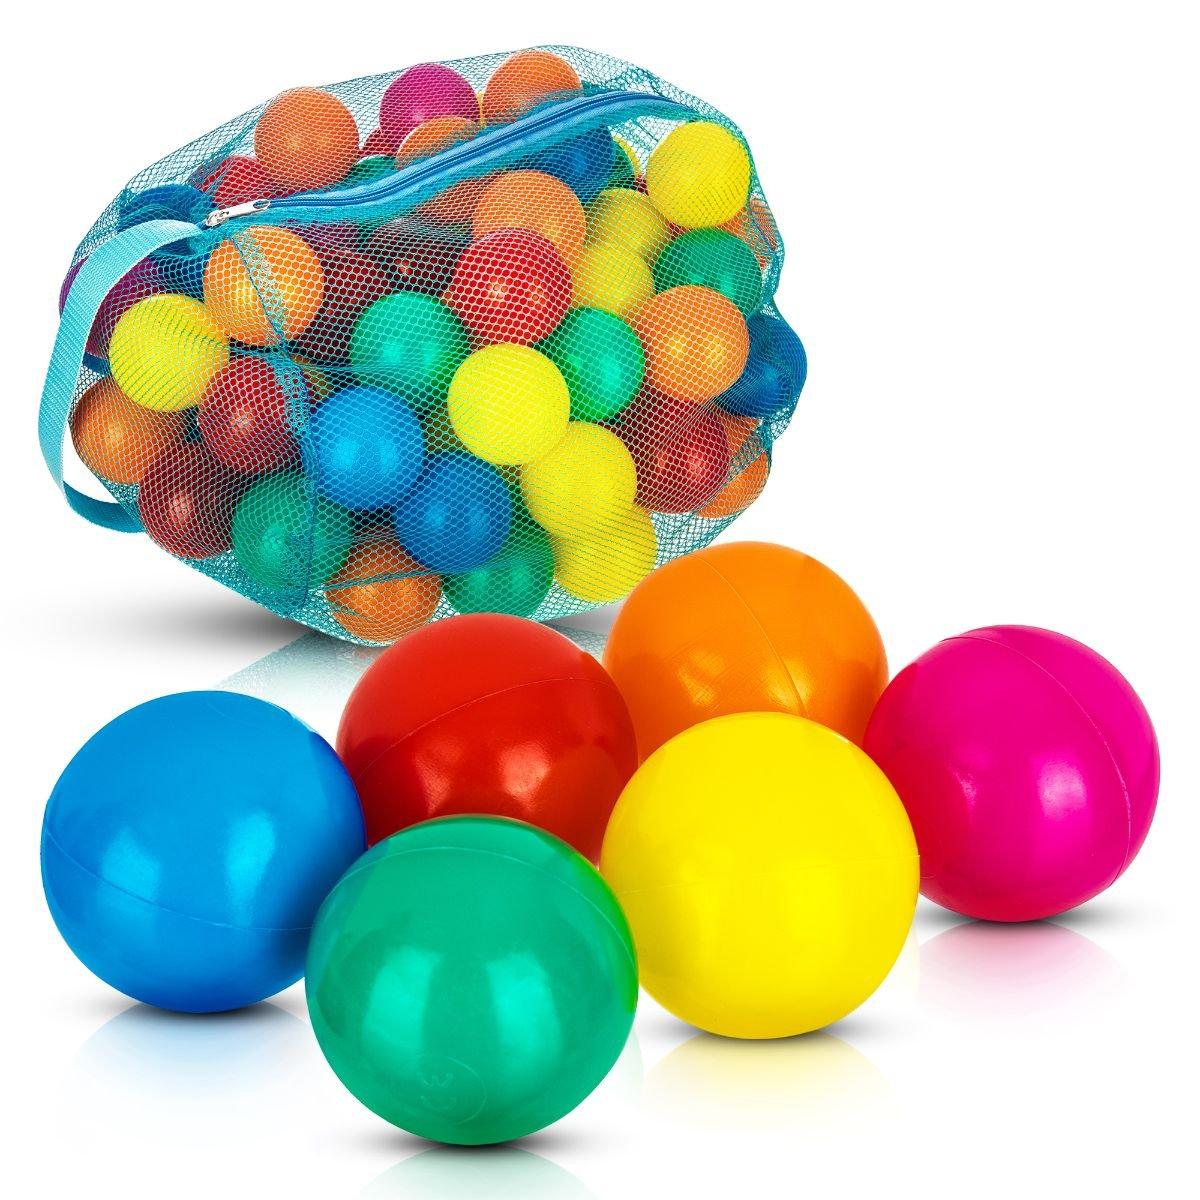 100-Pack Multicolored Soft Ball Set - Assorted Colors, 6cm